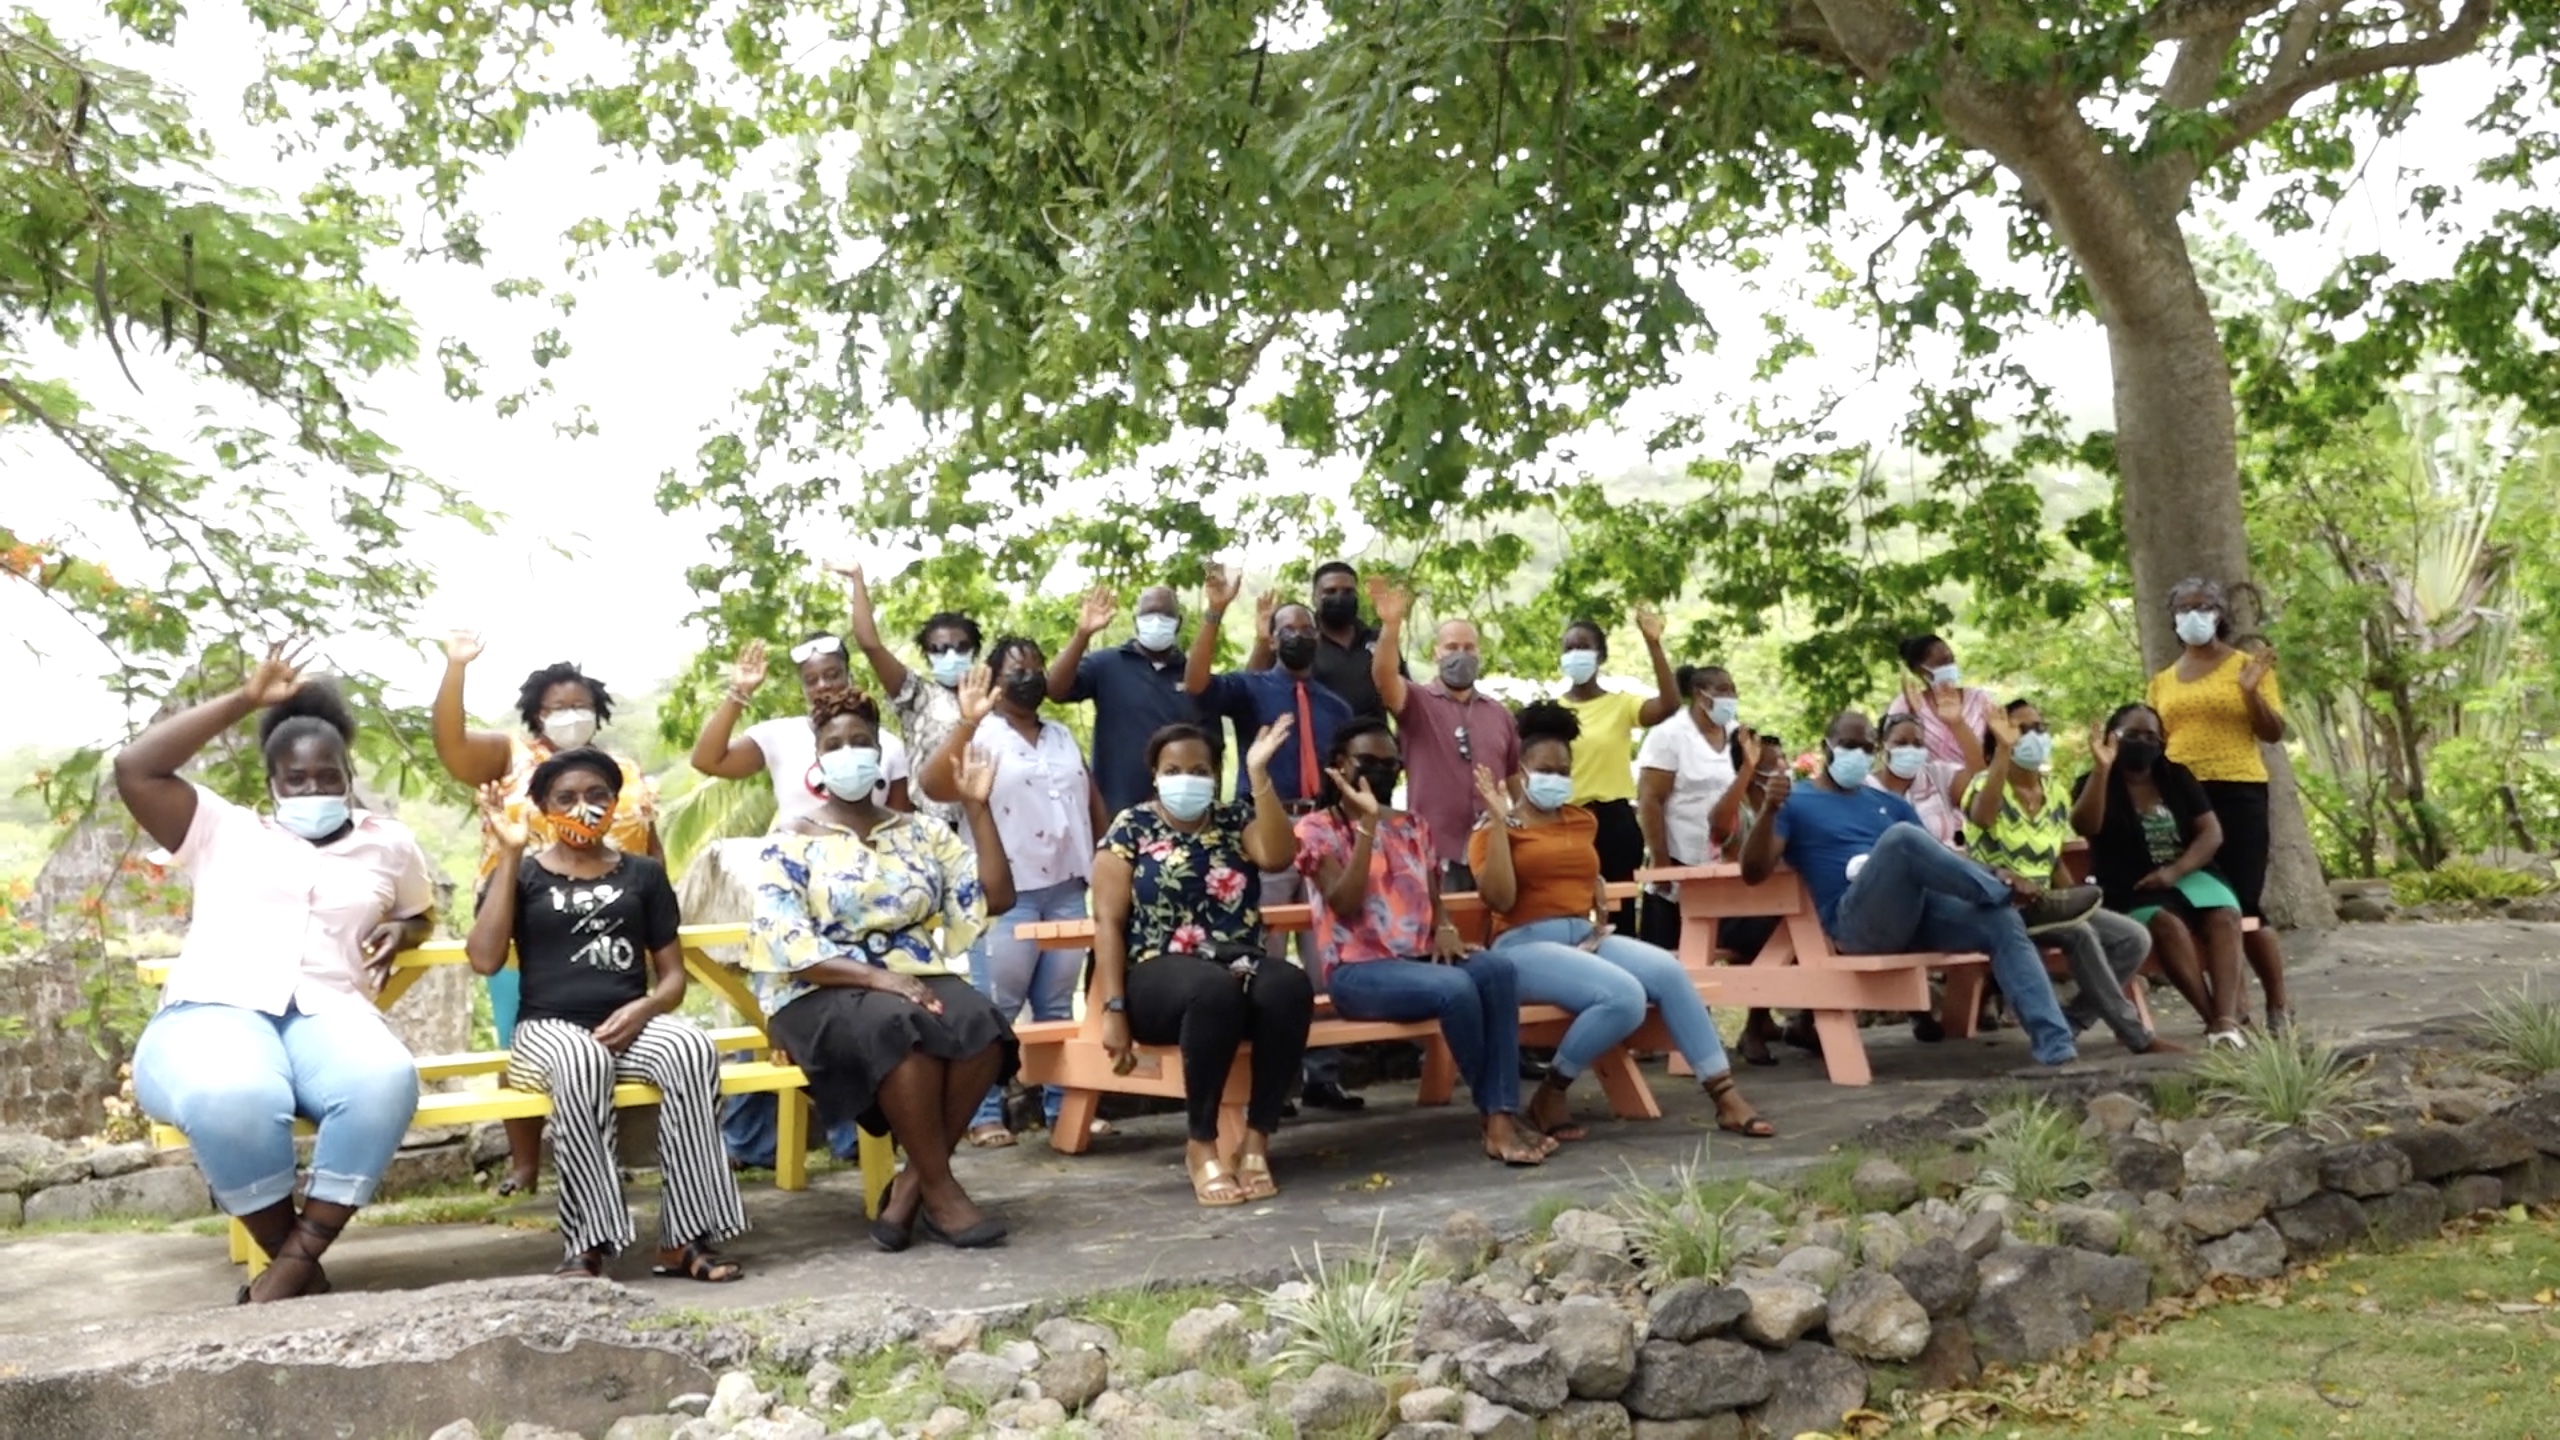 School principals, deputies and supervisors of public schools on Nevis at the Nevisian Heritage Village at Fothergills Estate in Gingerland on August 27, 2021, while on an islandwide tour organised for them by the Ministry of Education